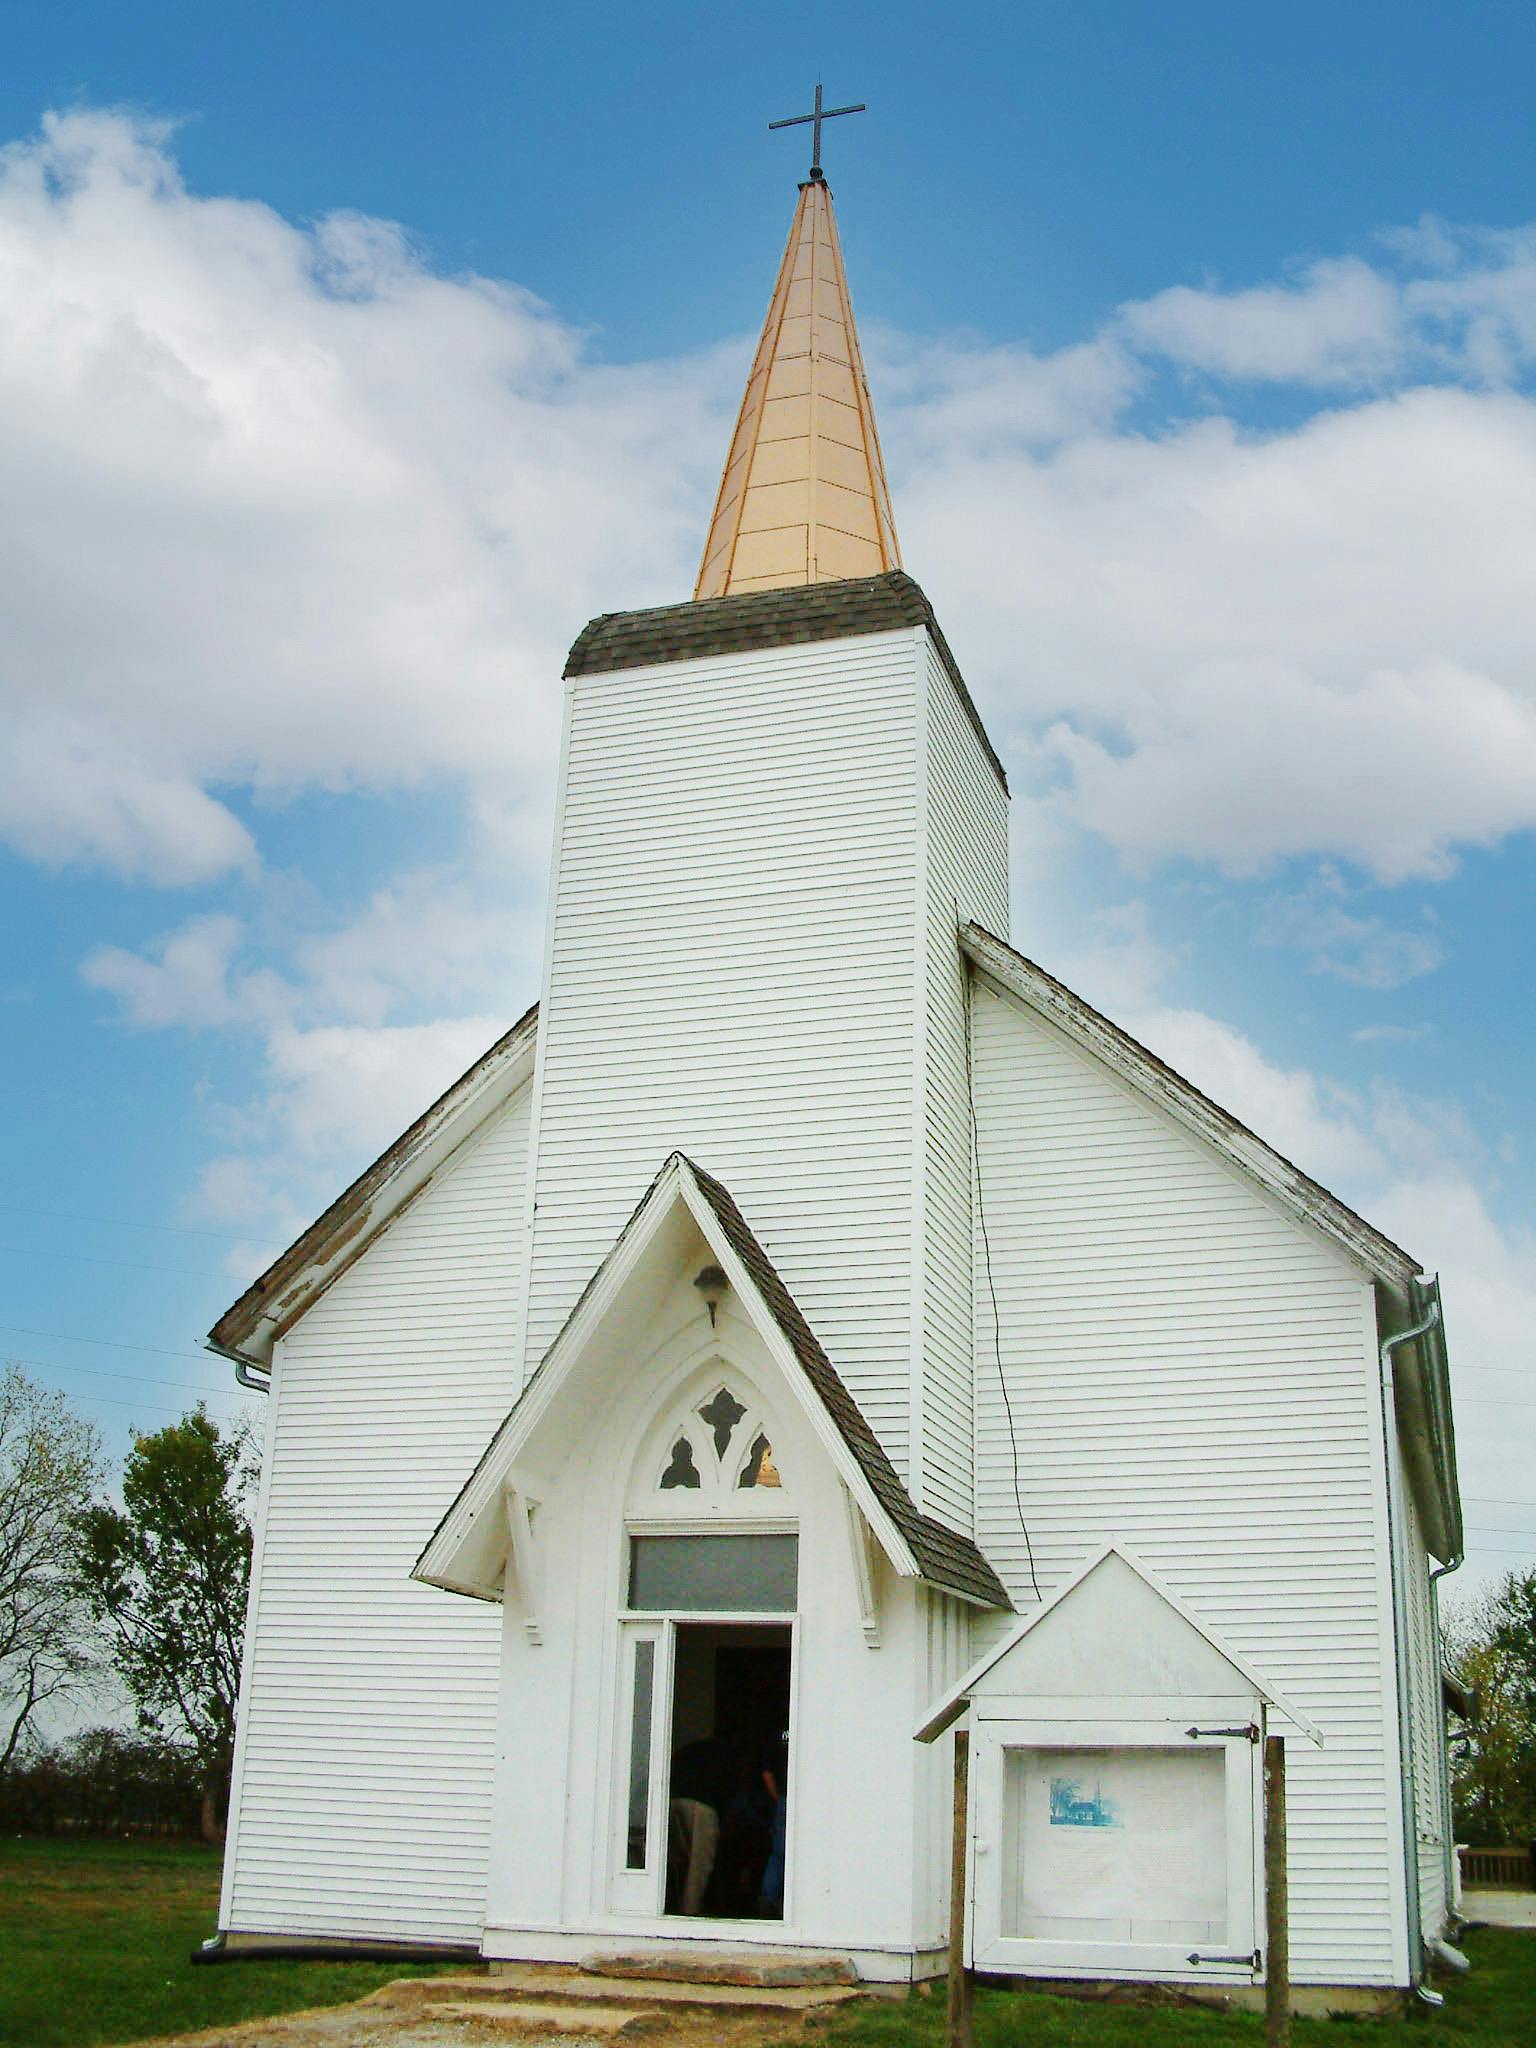 Lathrop Anique Show Grounds_ Living History Chapel.jpg